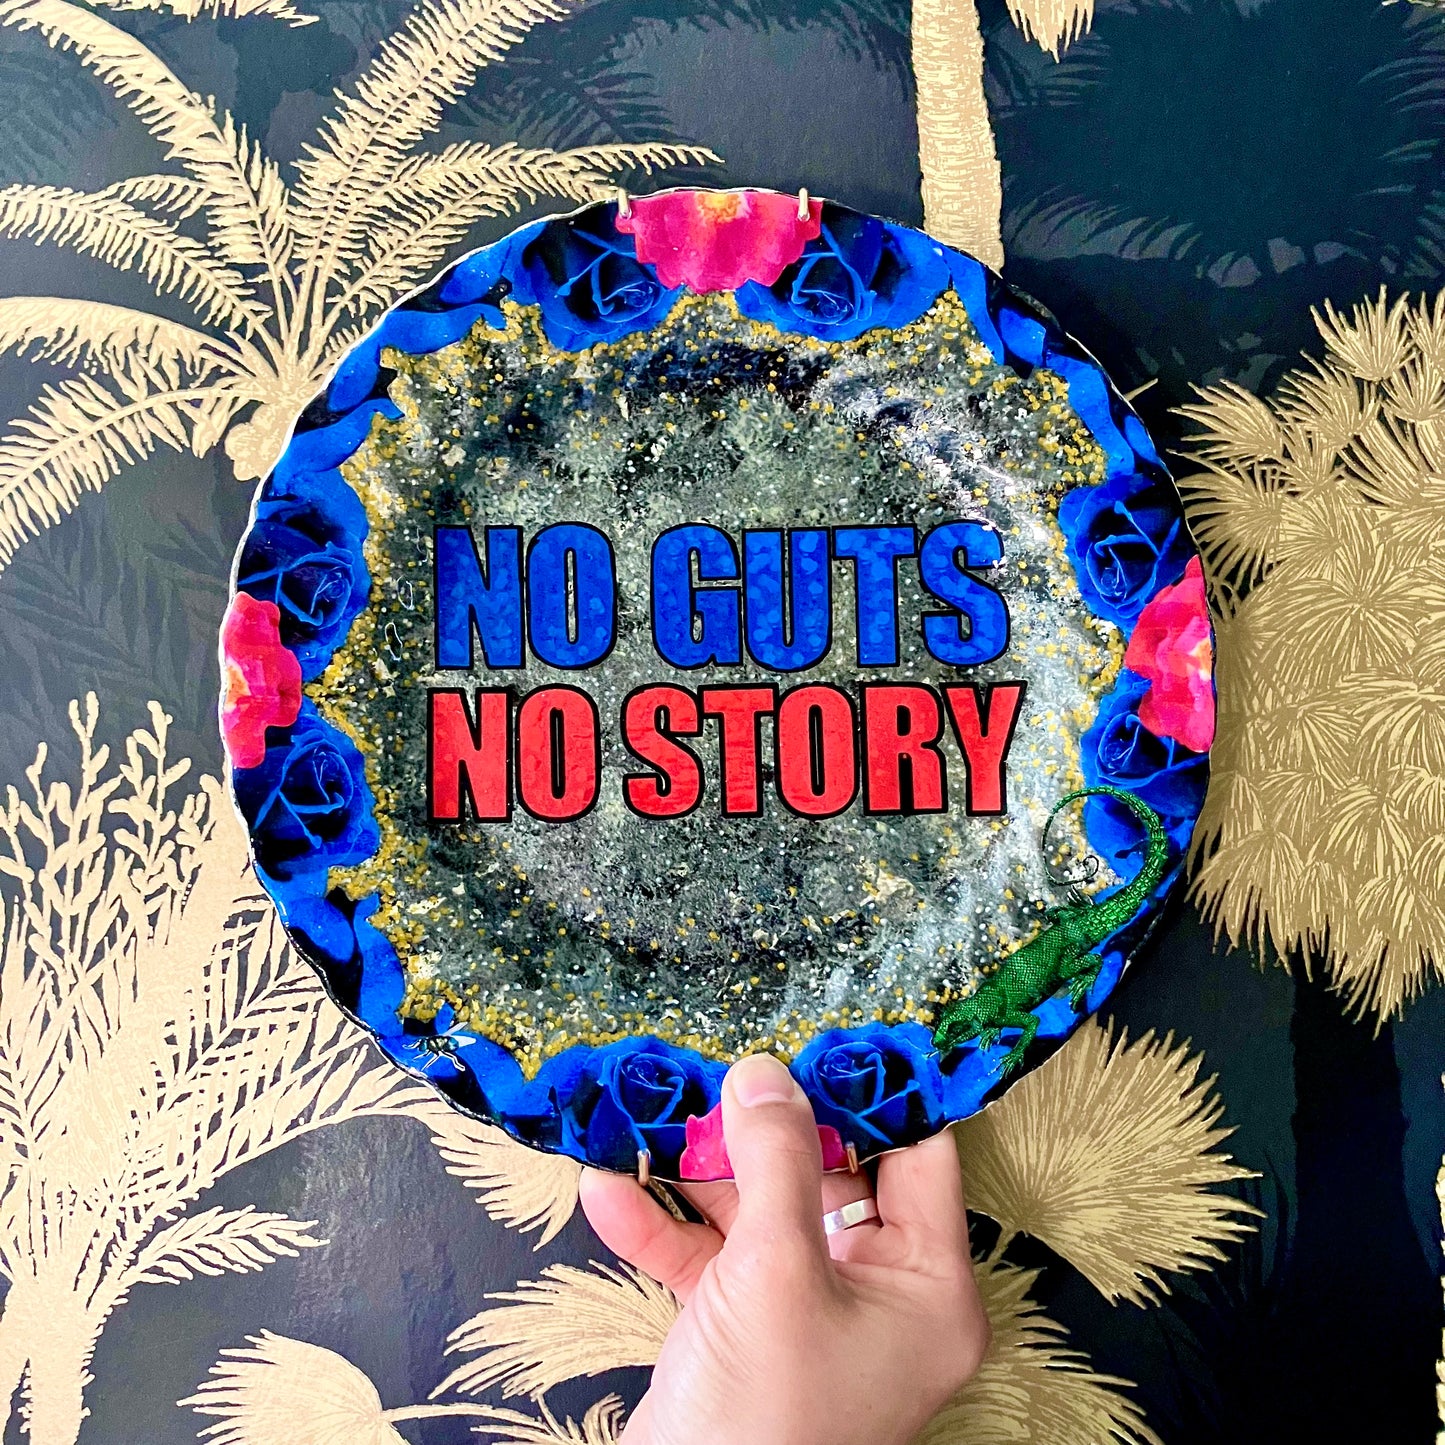 Grey Upcycled Wall Plate - “No Guts No Story” - by House of Frisson